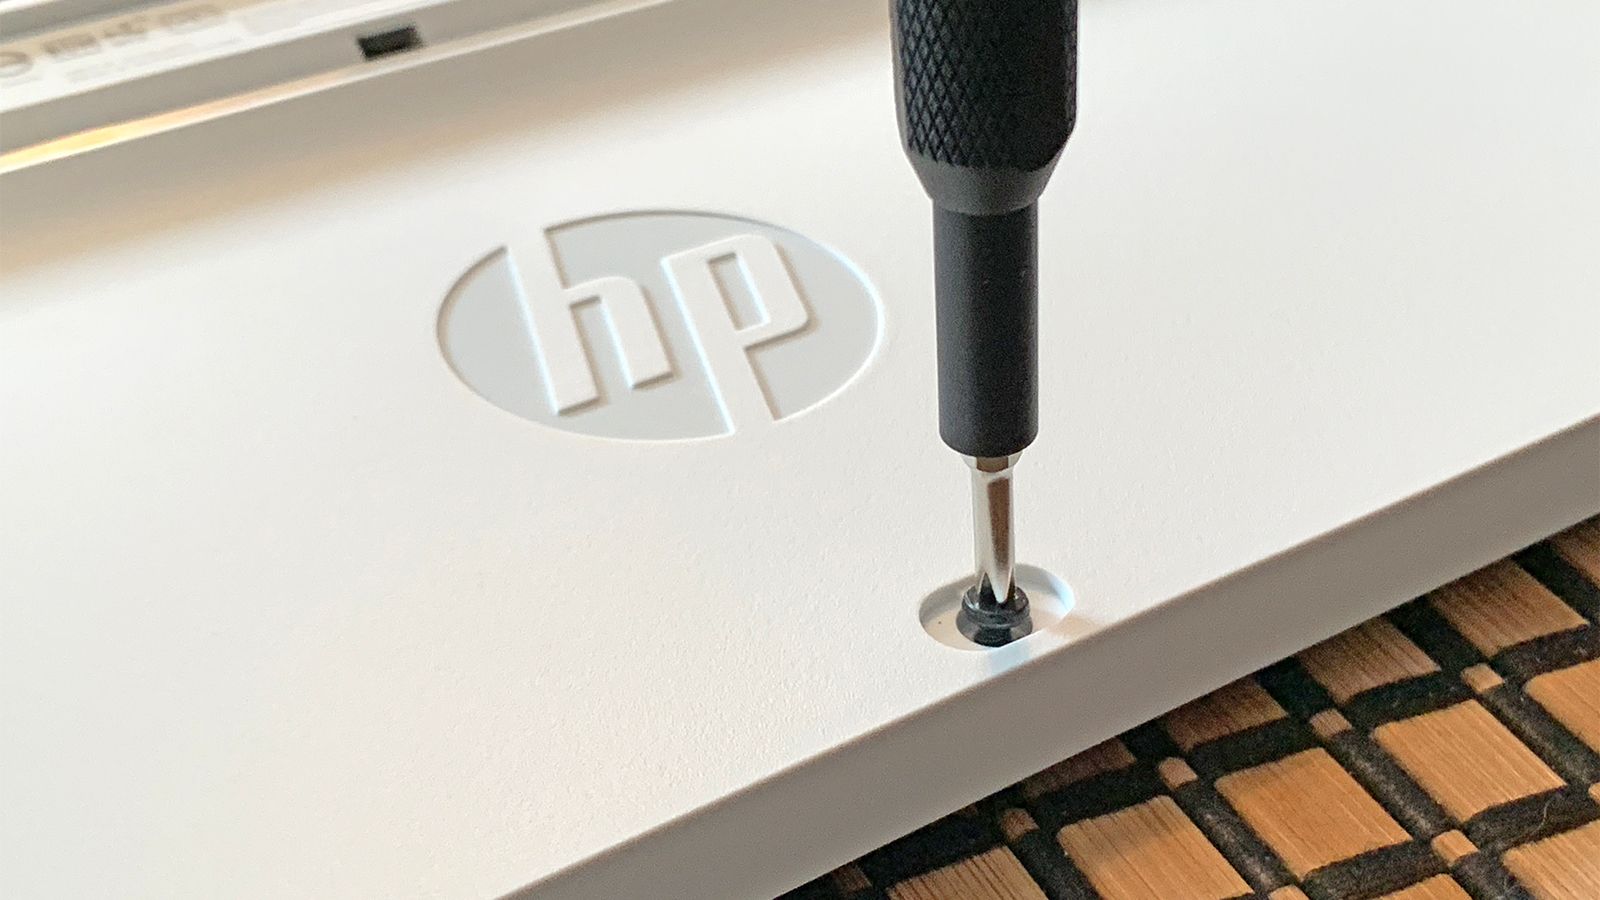 A screwdriver removing a screw on an HP keyboard.